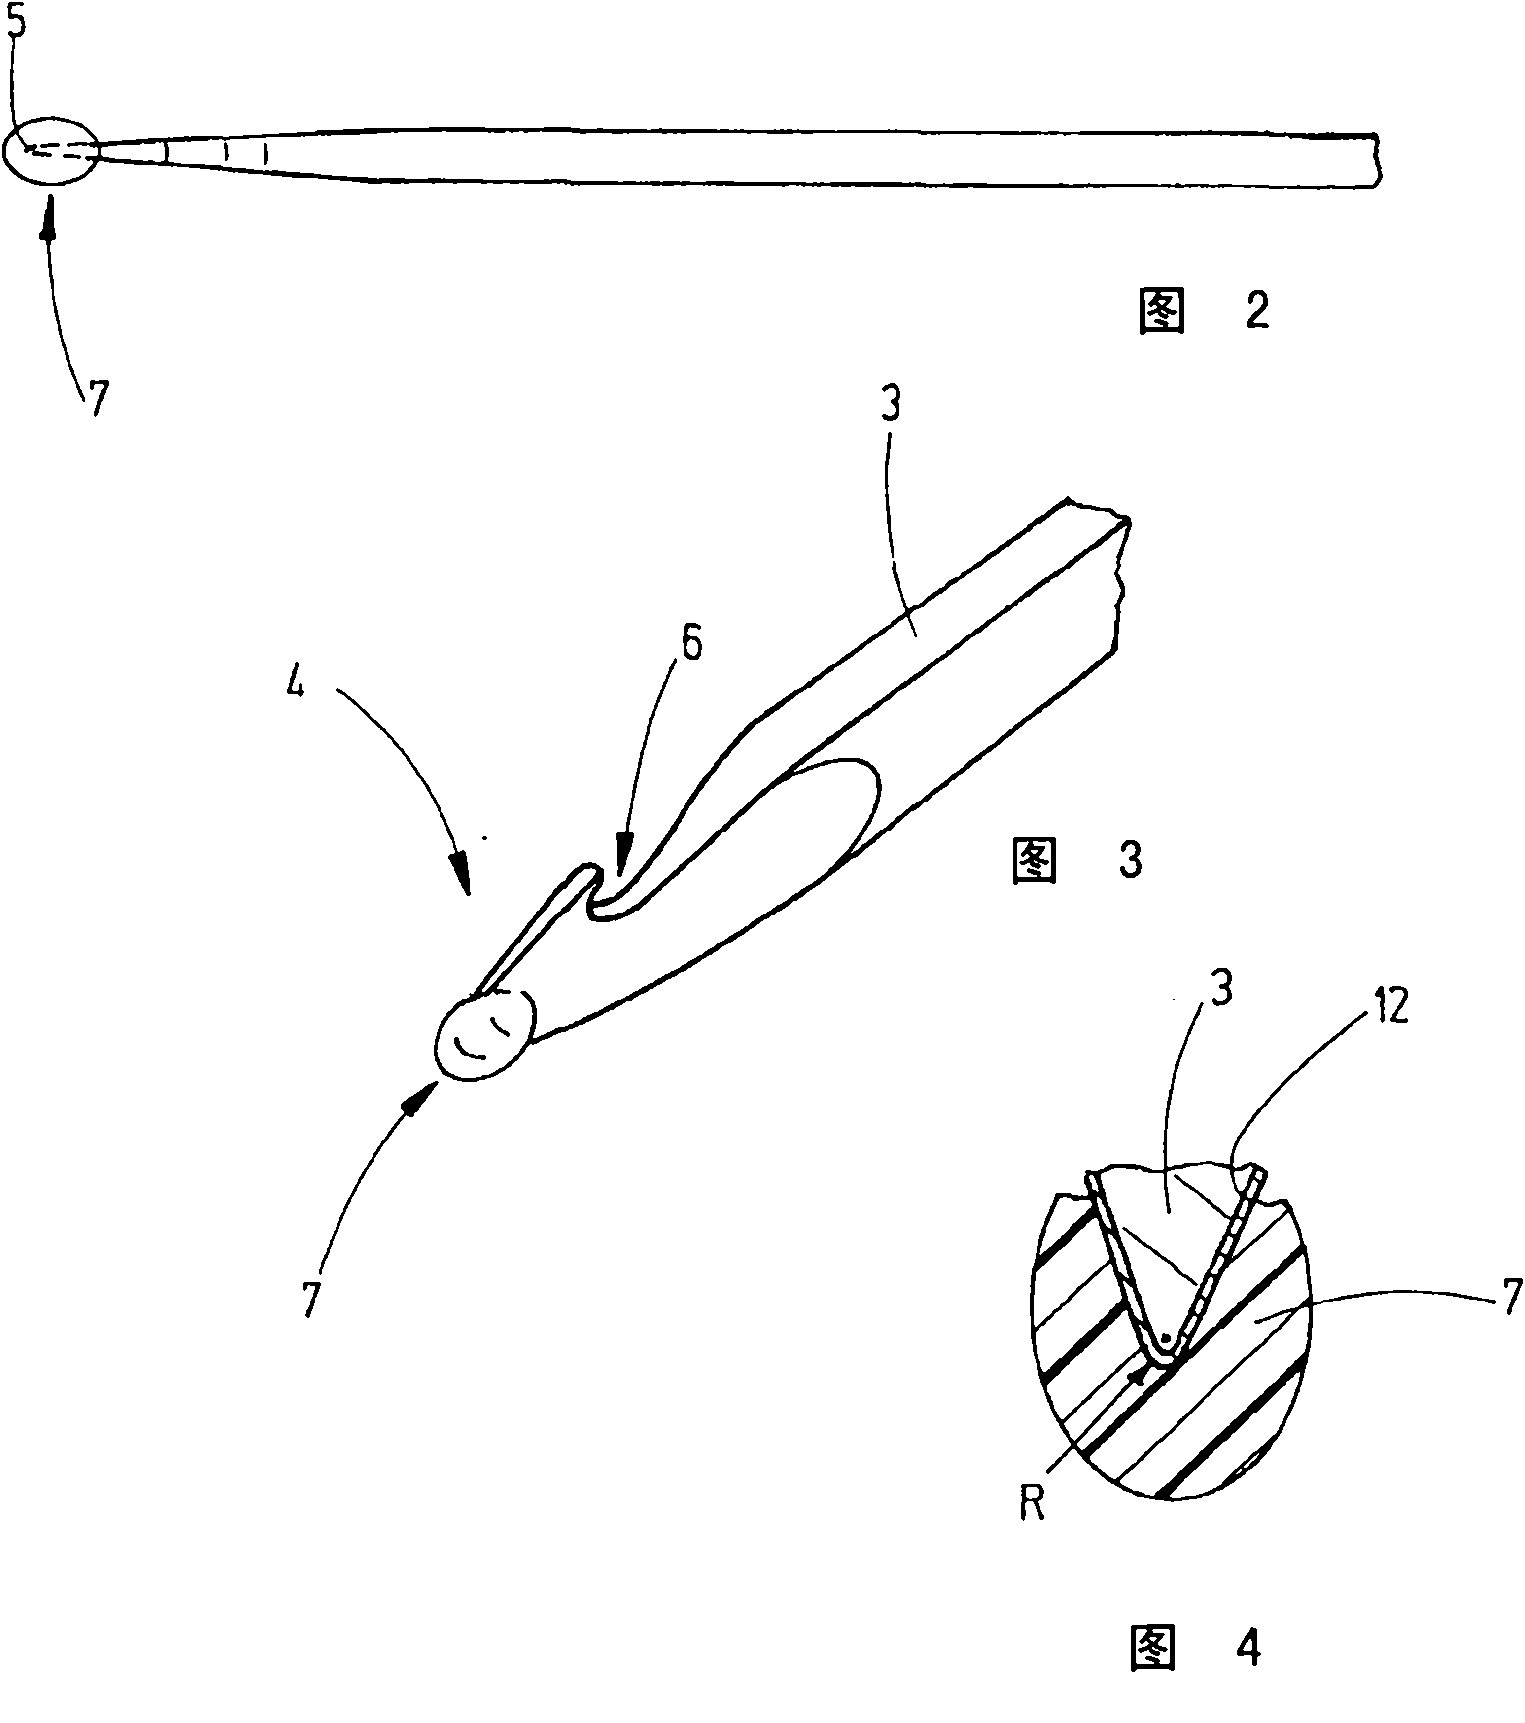 Textile tool with temporary protection